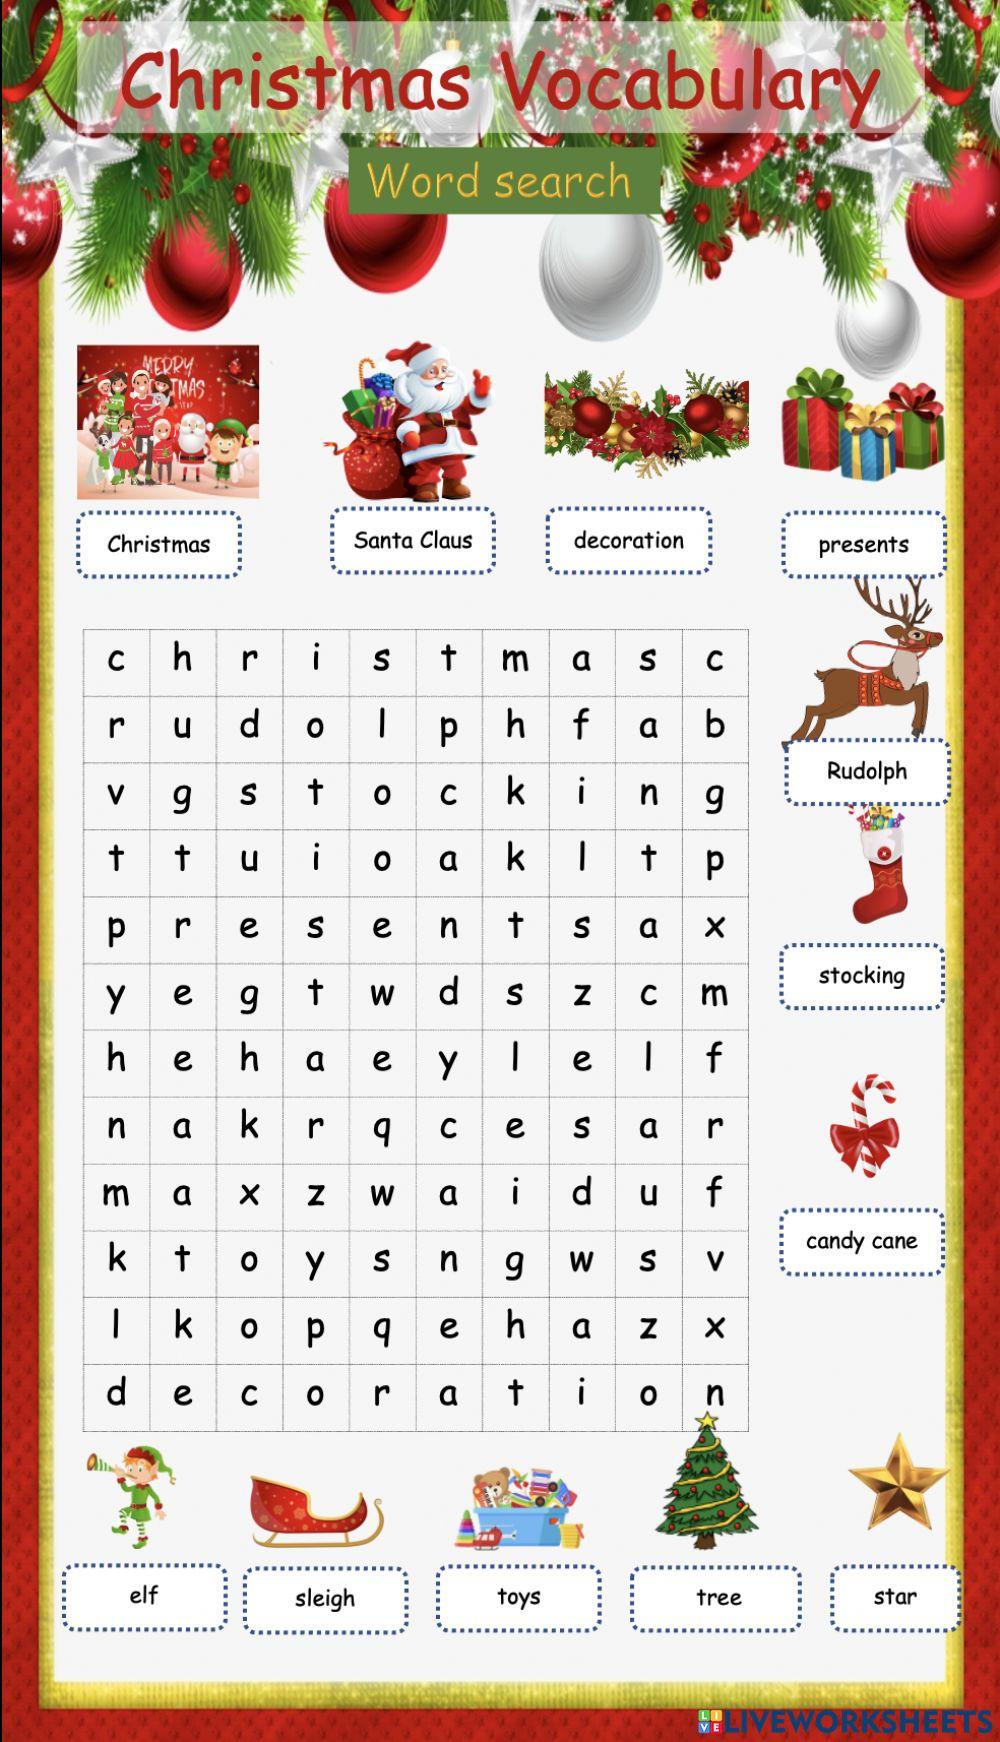 Christmas Vocab Wordsearch